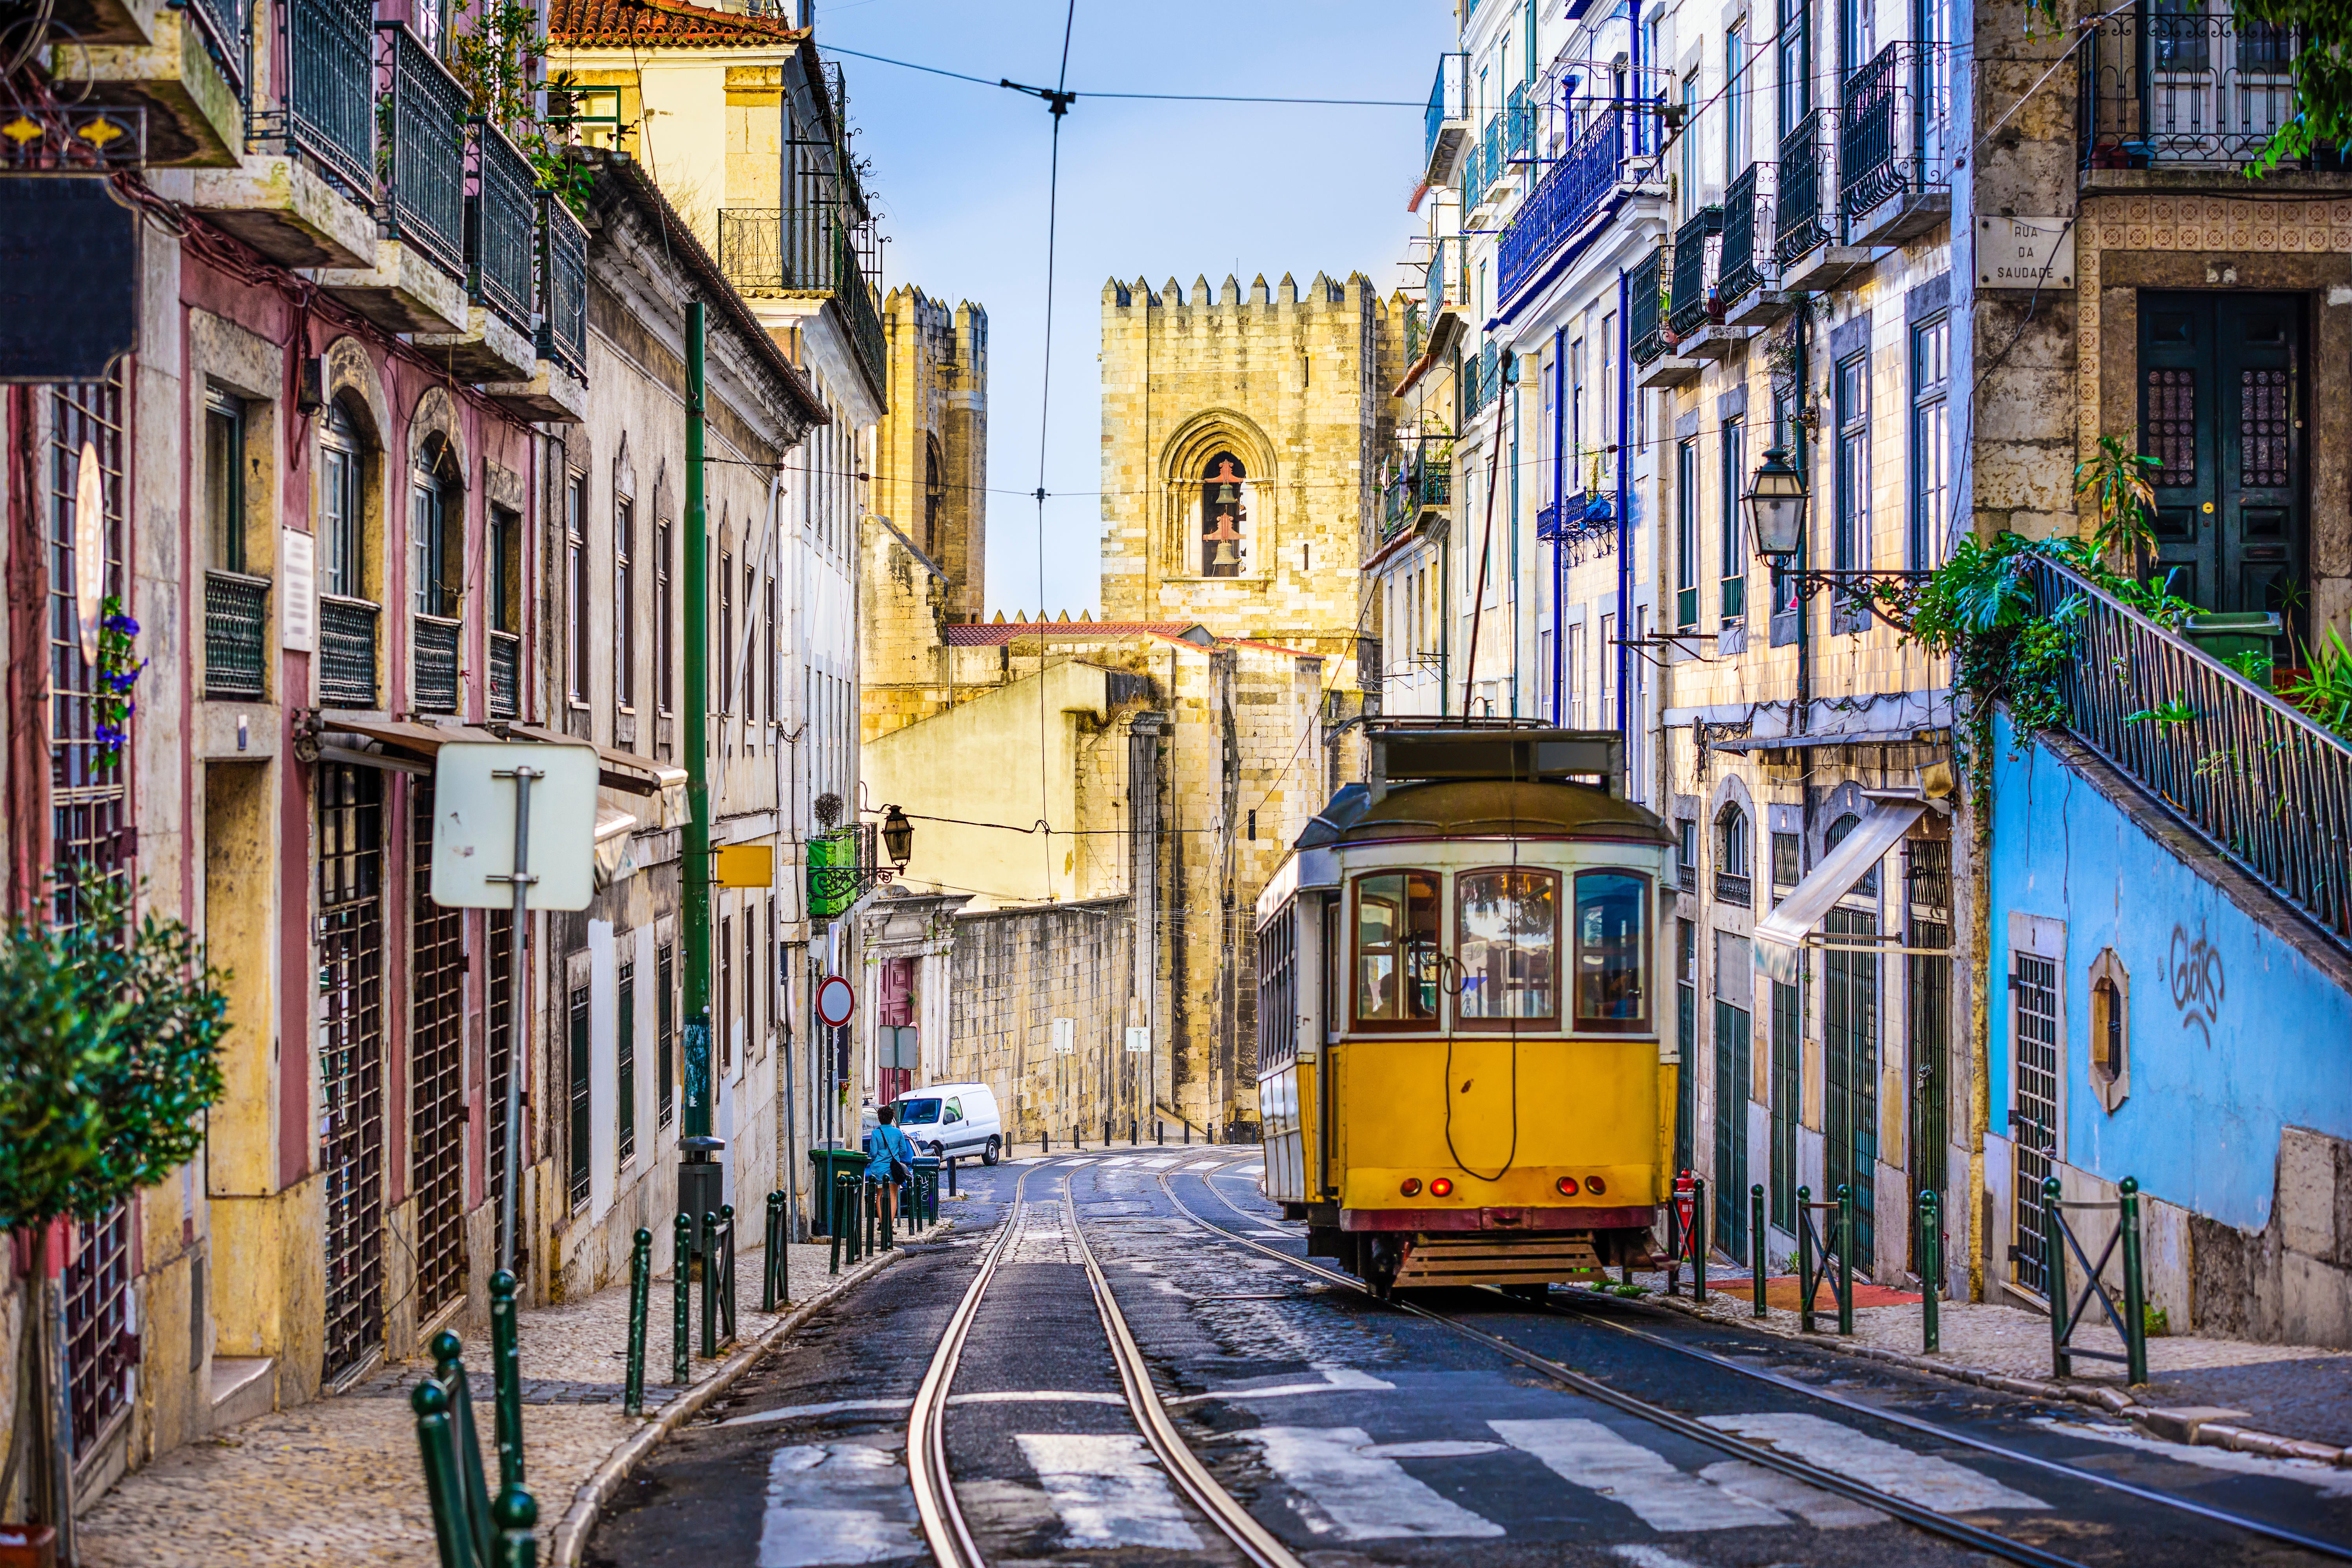 Portugal is easing travel restrictions for vaccinated visitors